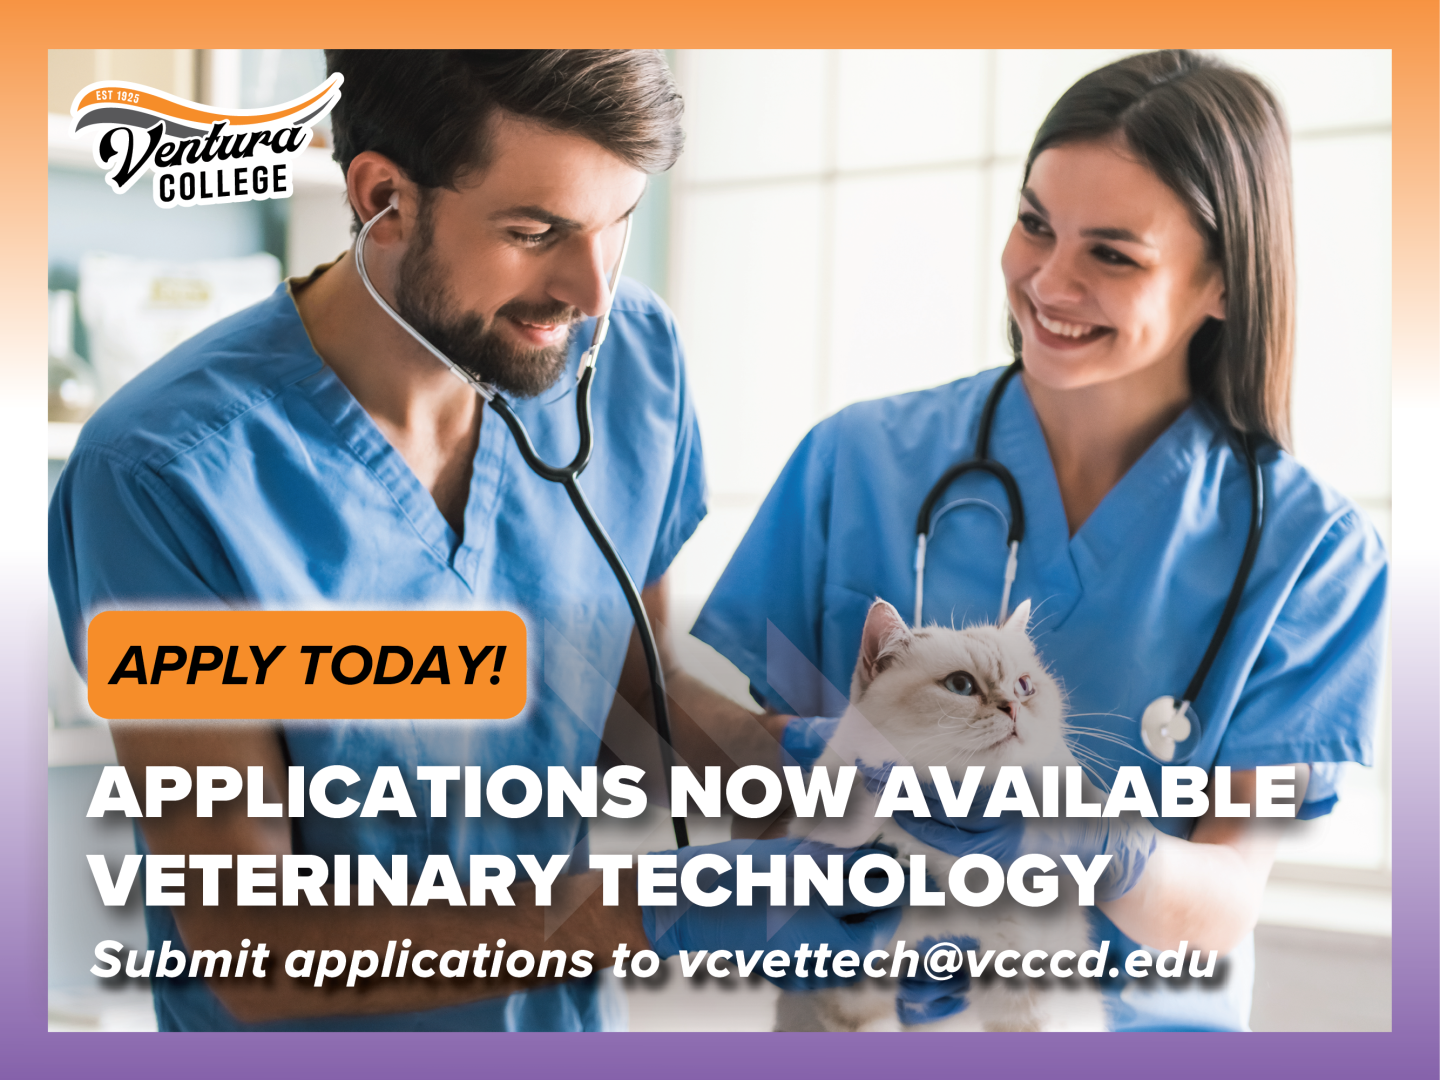 Veterinary Technology Application Announcement: Featuring two veterinary technicians working on a cat